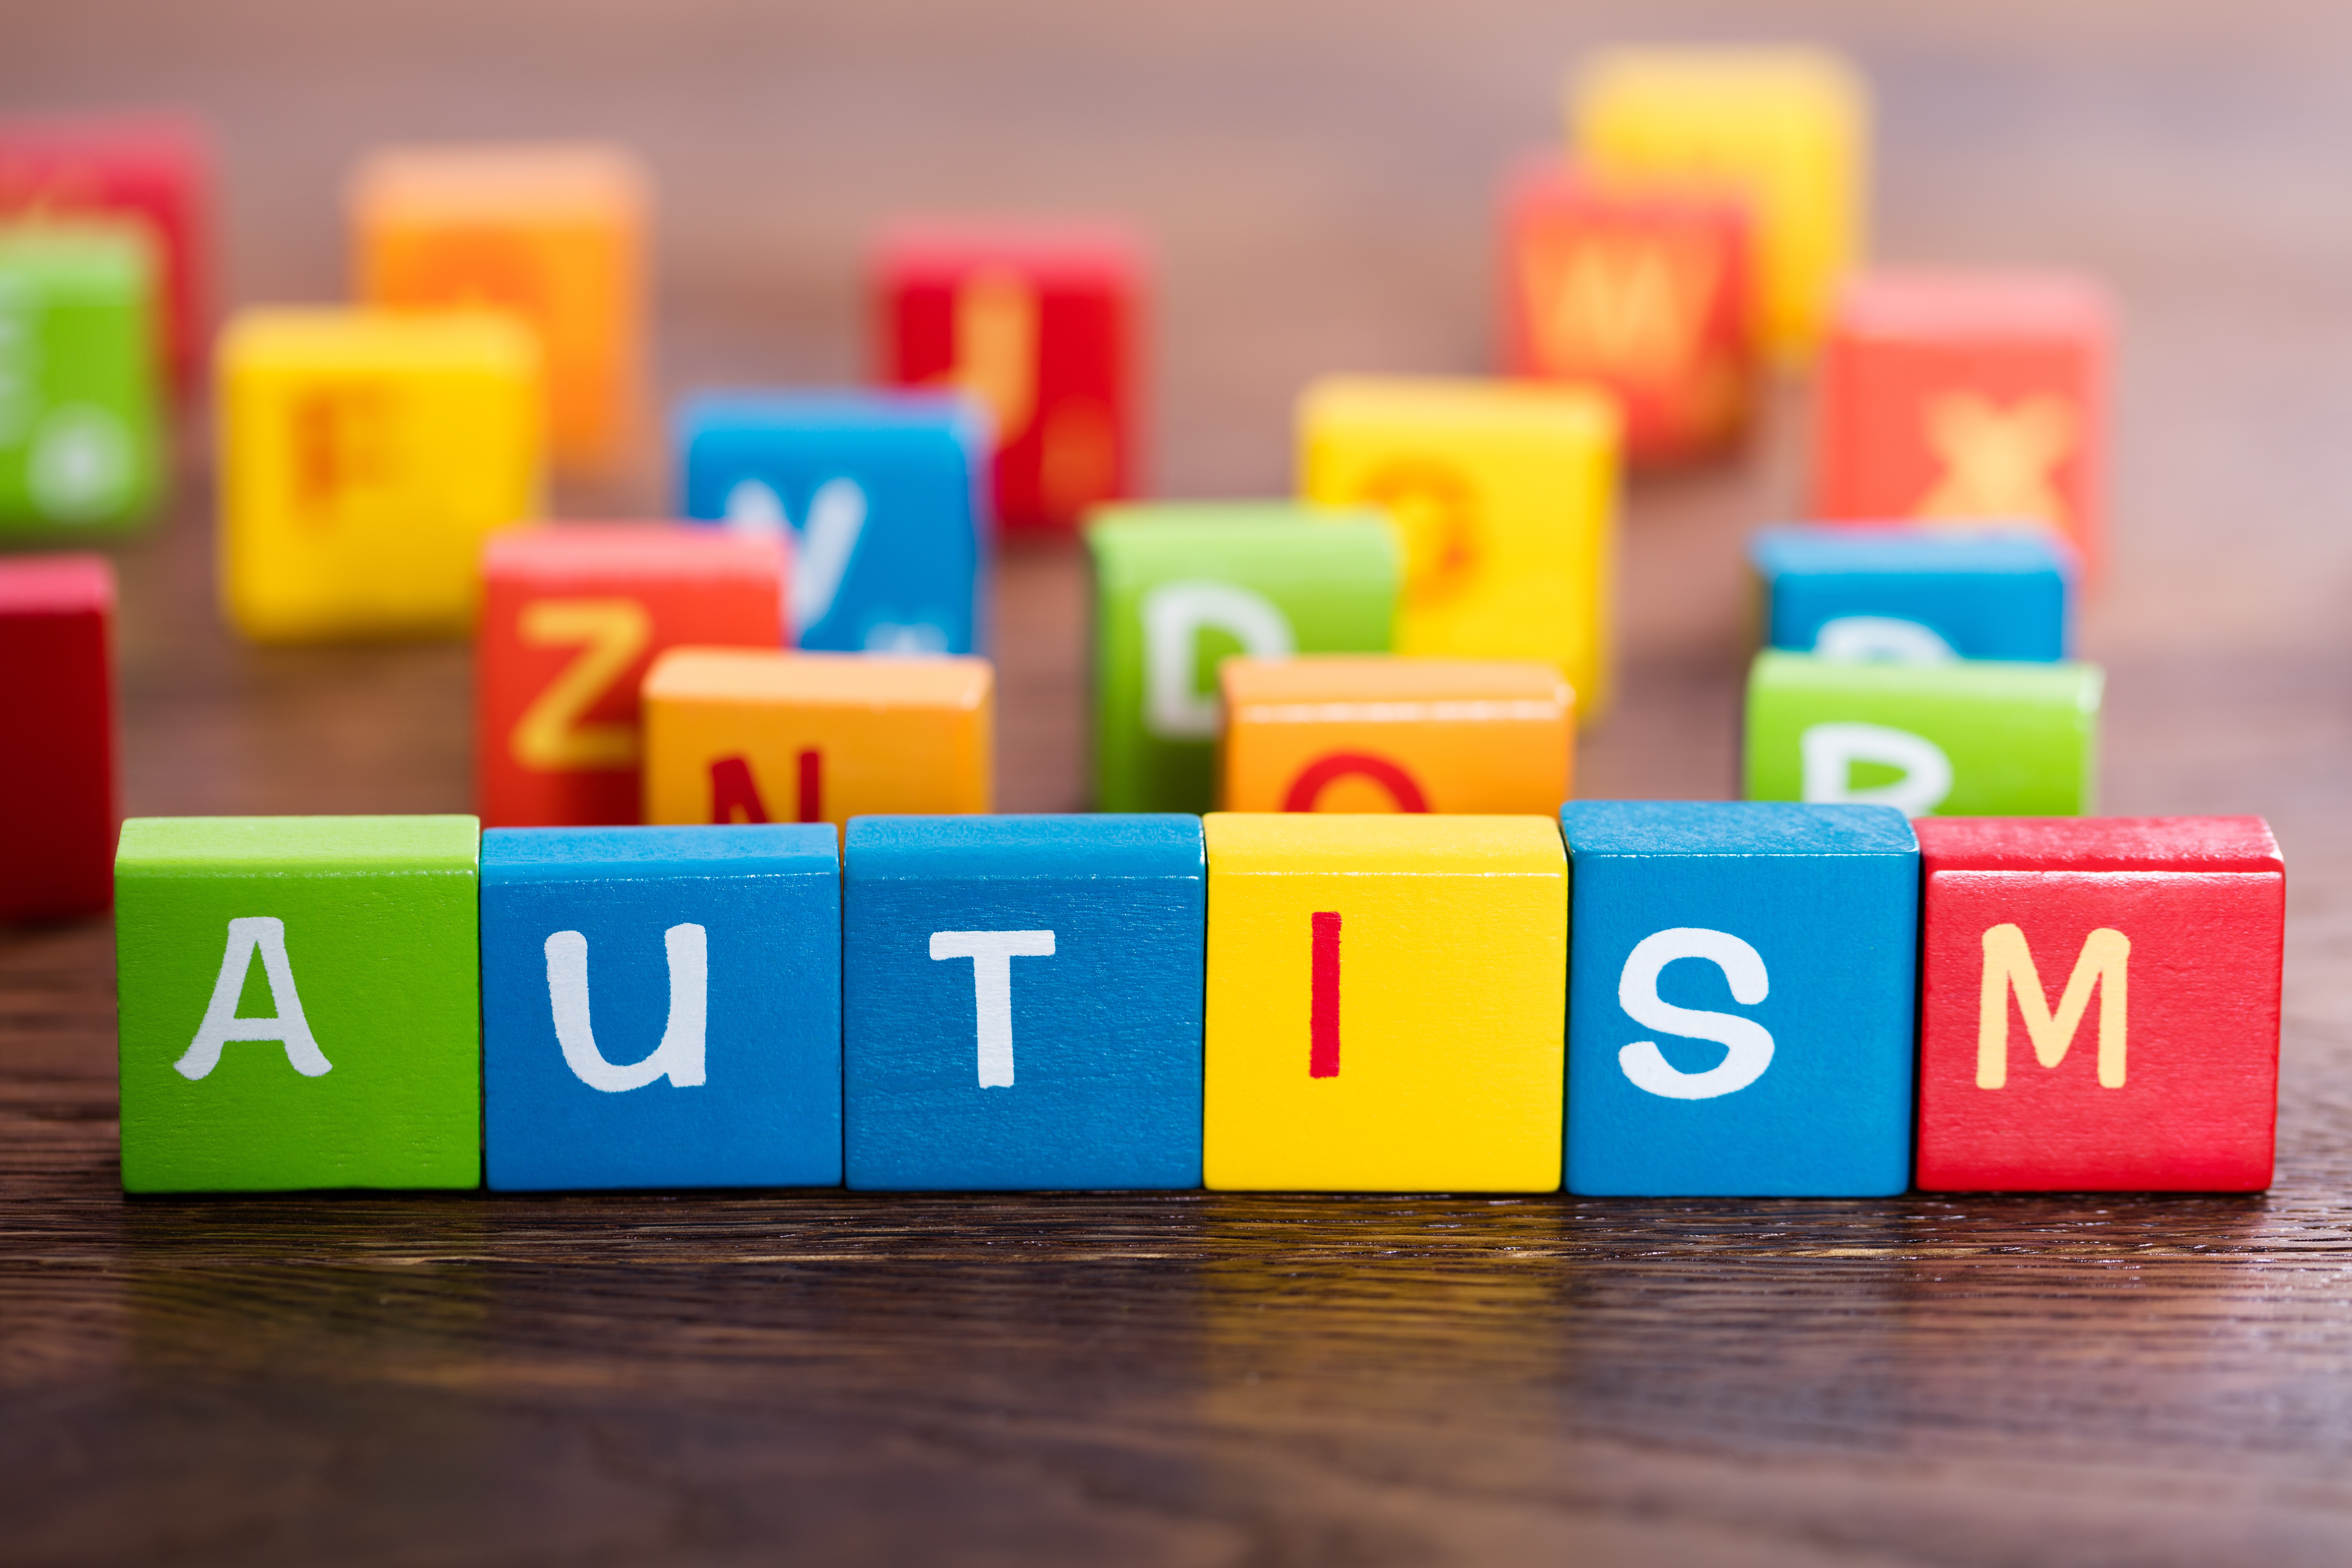 Course Image for XOA8AR71_ NCFE CACHE Level 2 Certificate in Understanding Autism